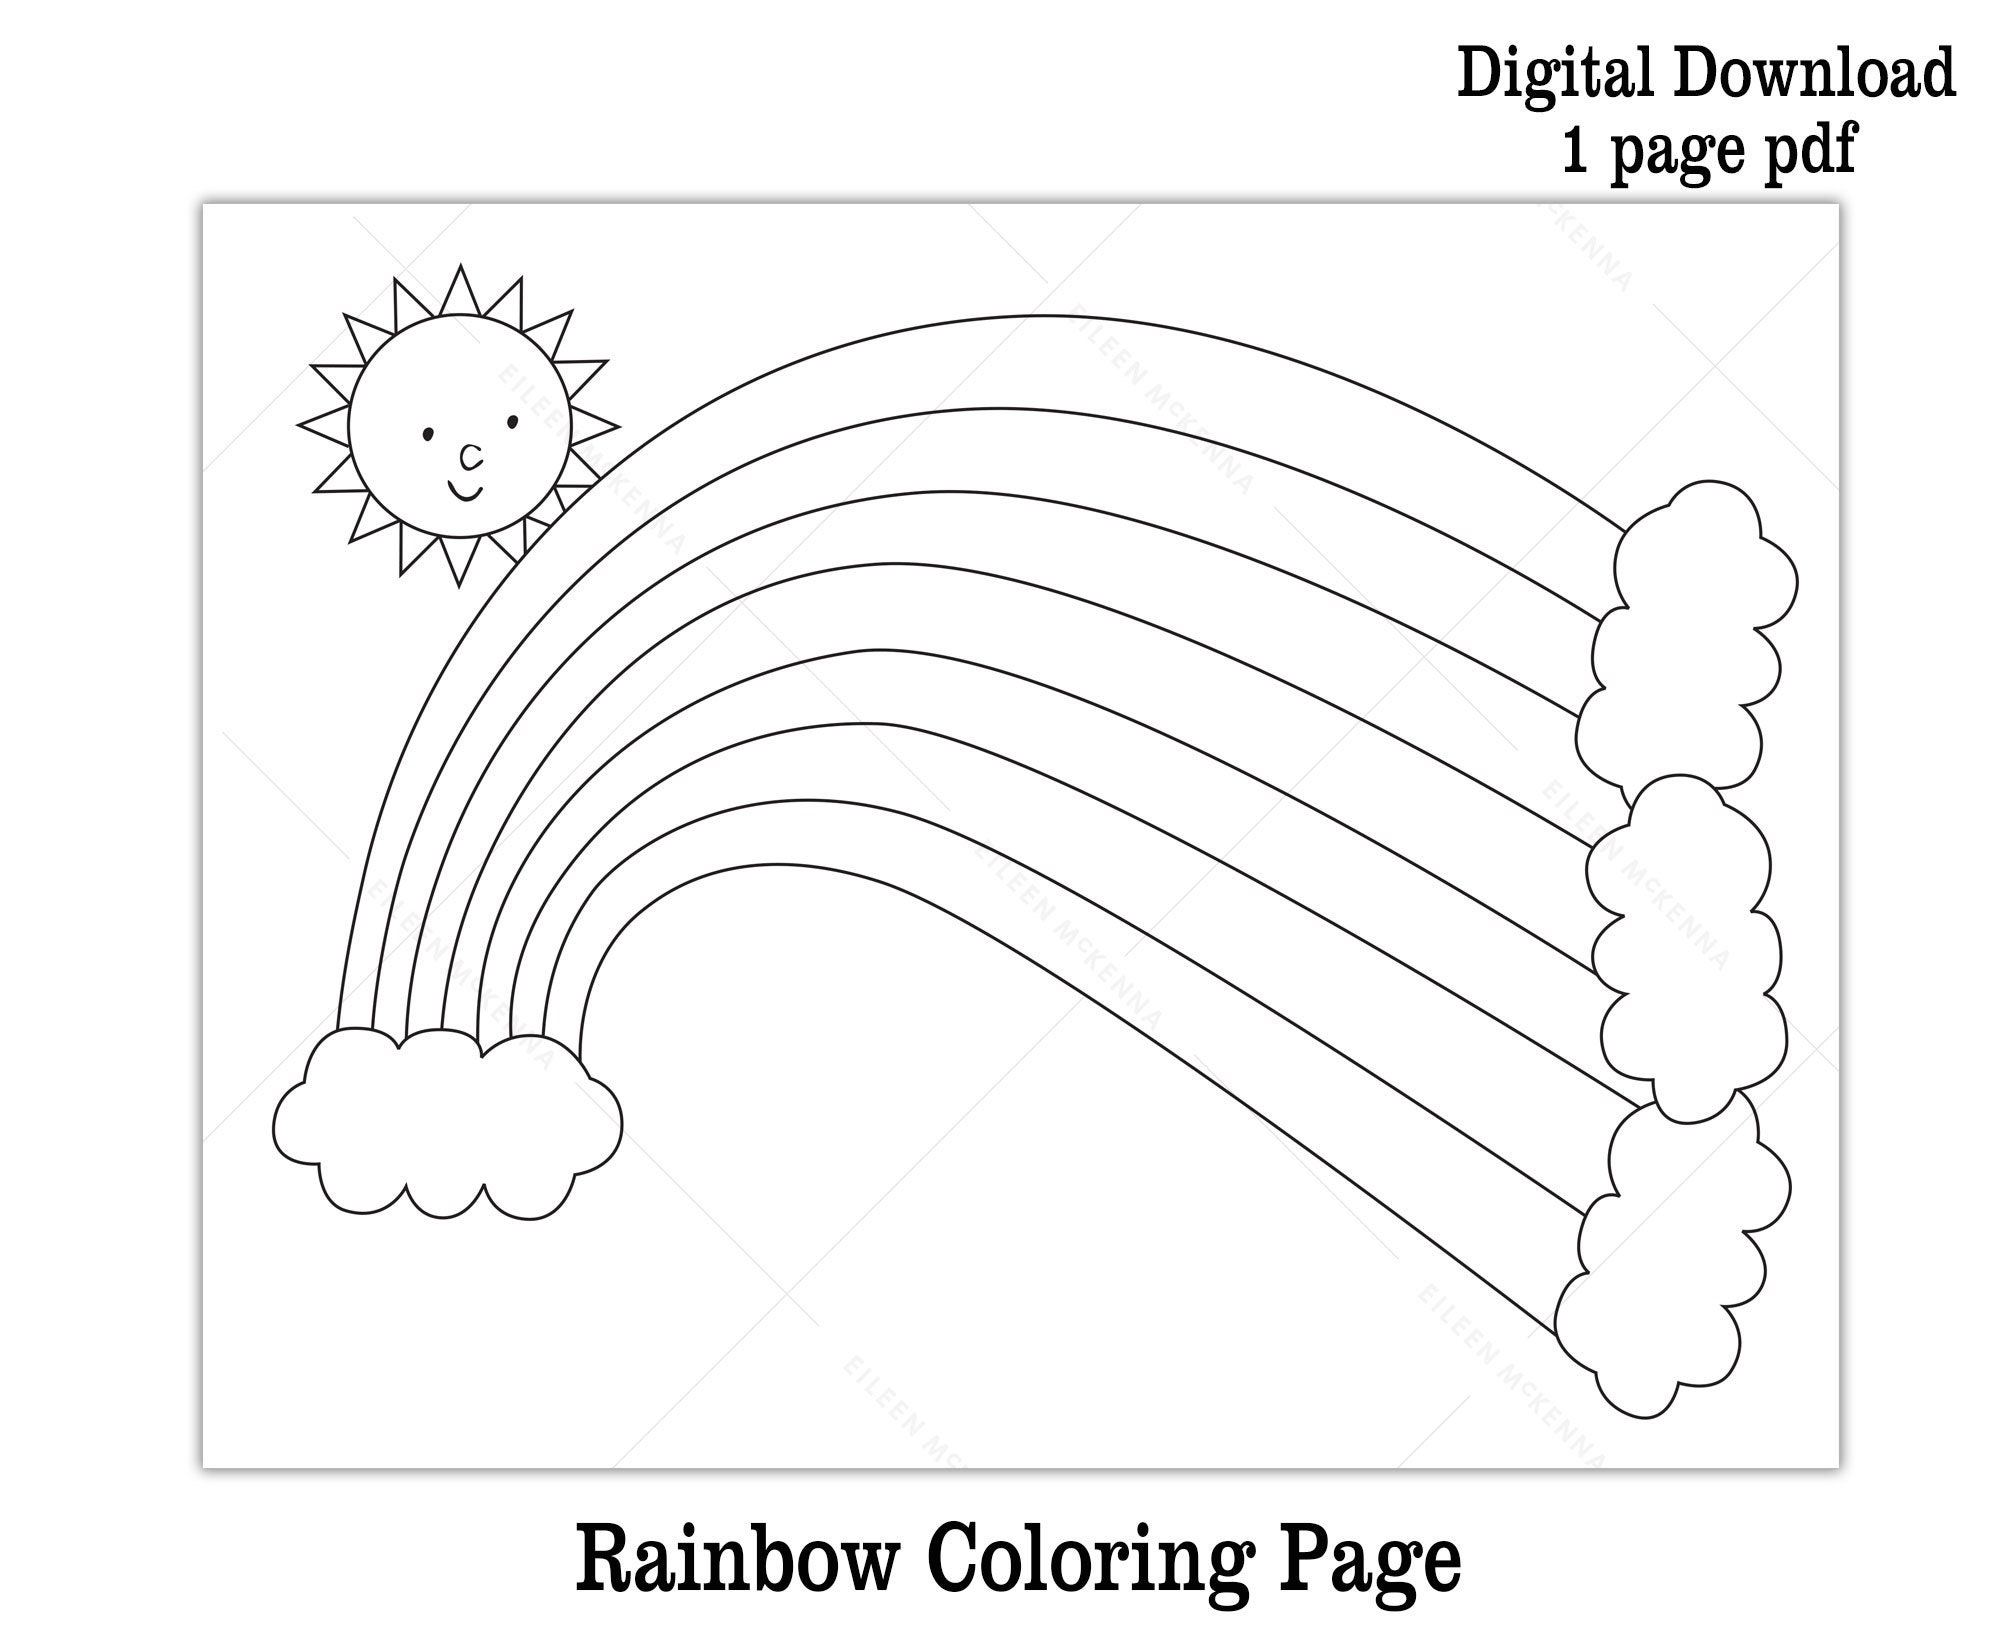 Rainbow Coloring Page Printable Rainbow + Sun Kids Activity Fun Self  Quarantine Digital Download Online Learning Colors of the Rainbow Sheet